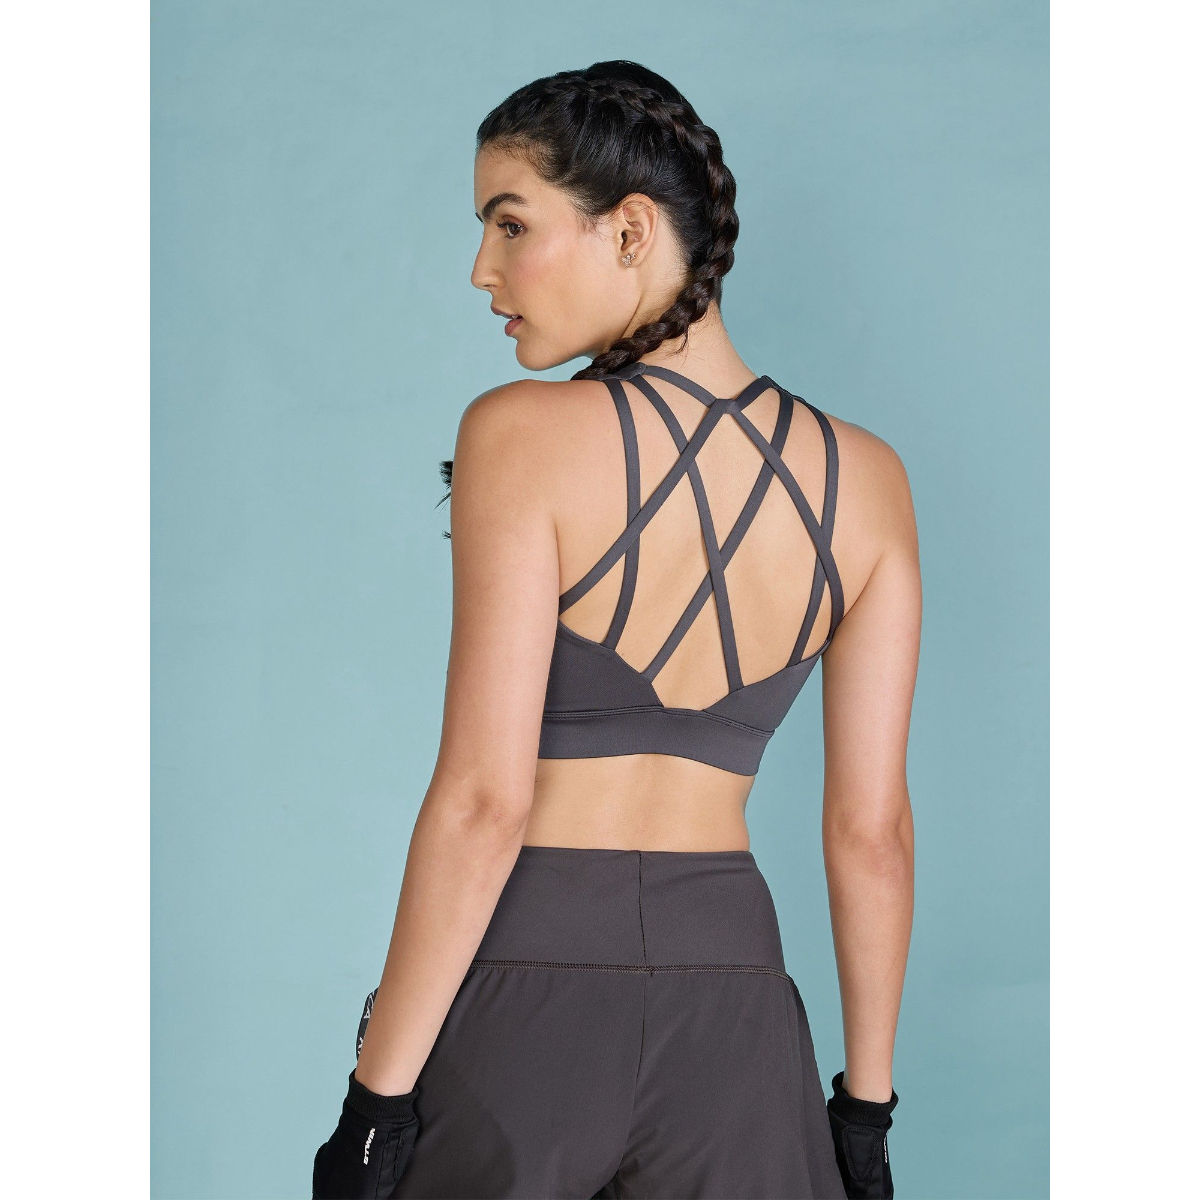 Women Fashionable Strappy Sports Bra with Removable Pads